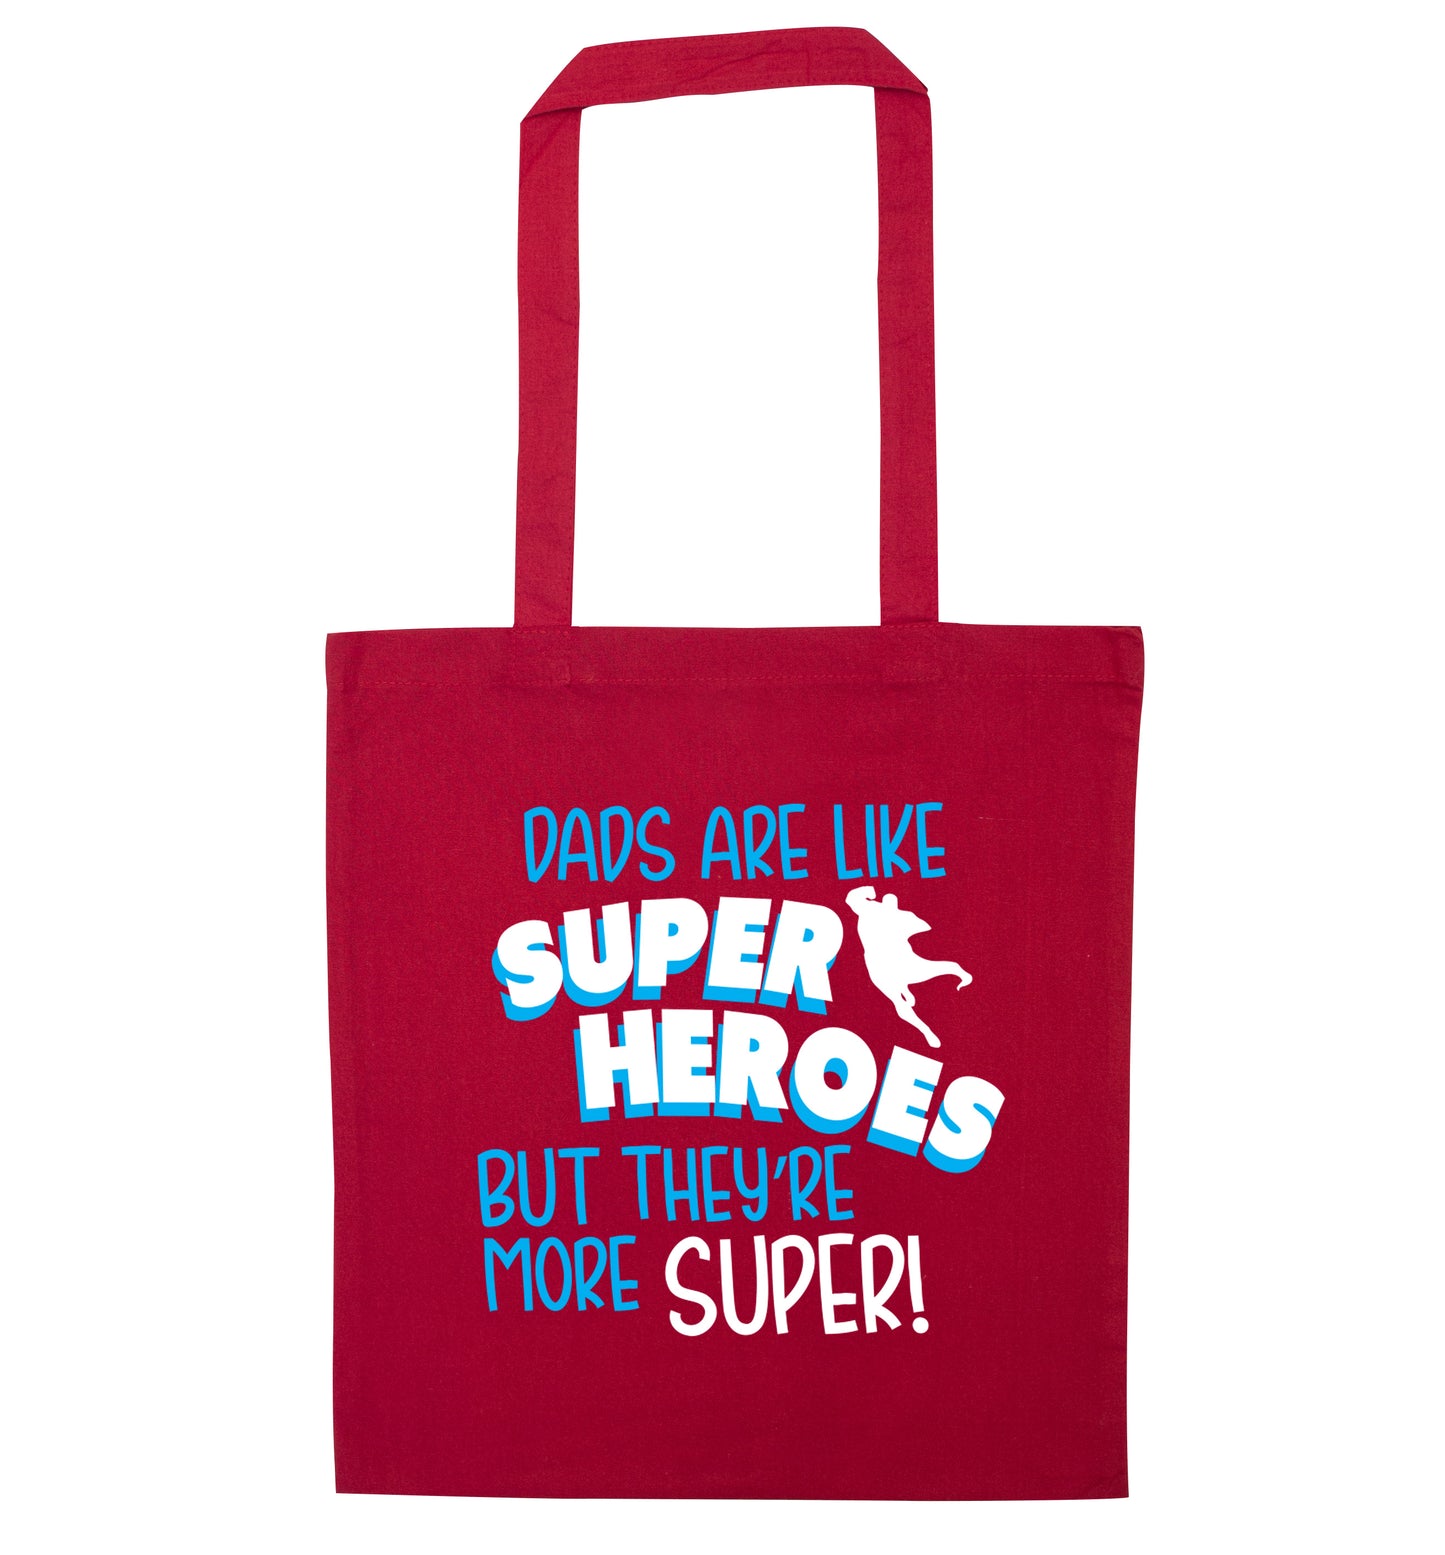 Dads are like superheros but they're more super red tote bag